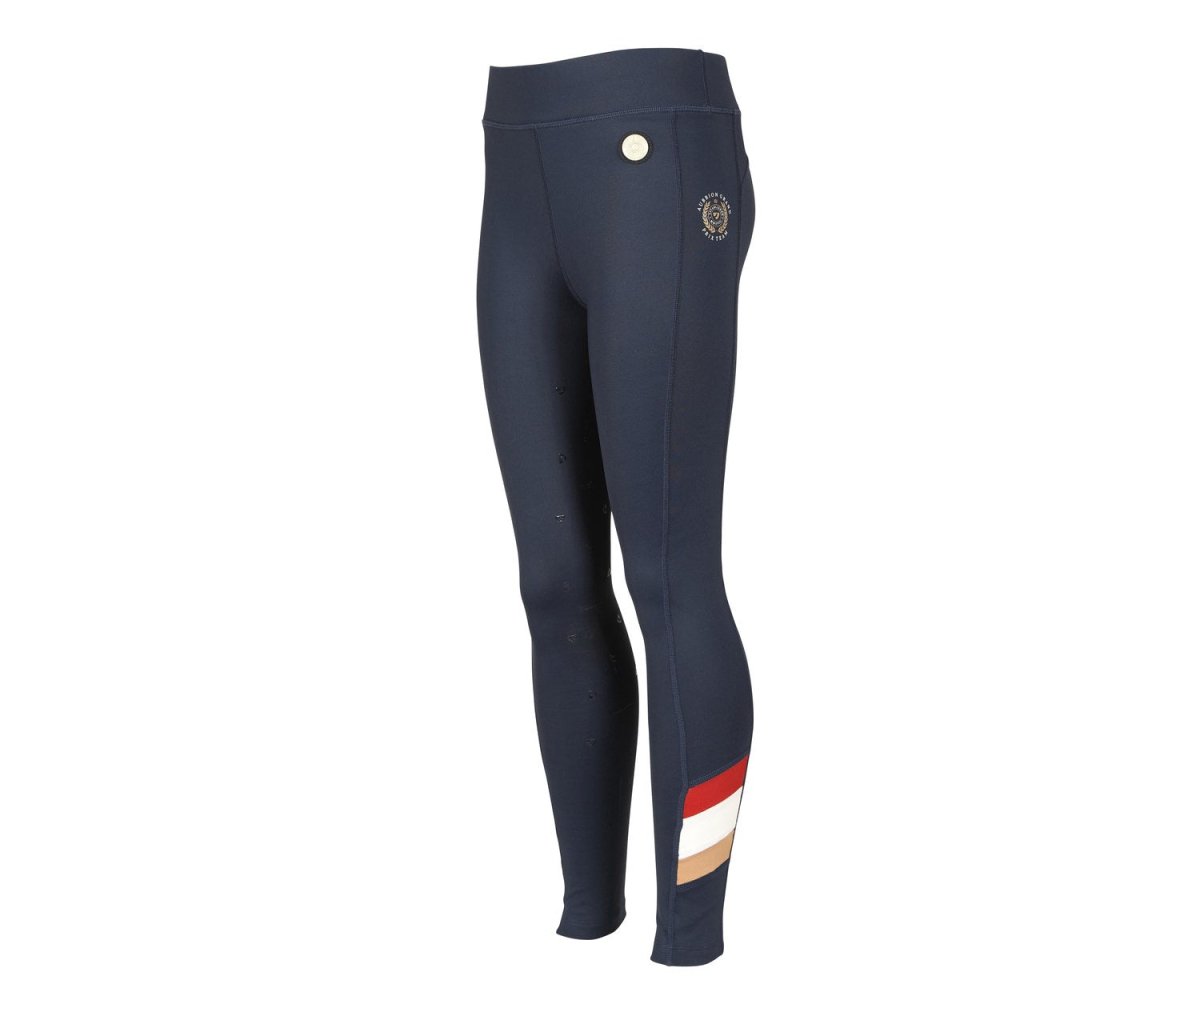 Aubrion AW23 Young Riders Team Shield Riding Tights - Navy - 9/10